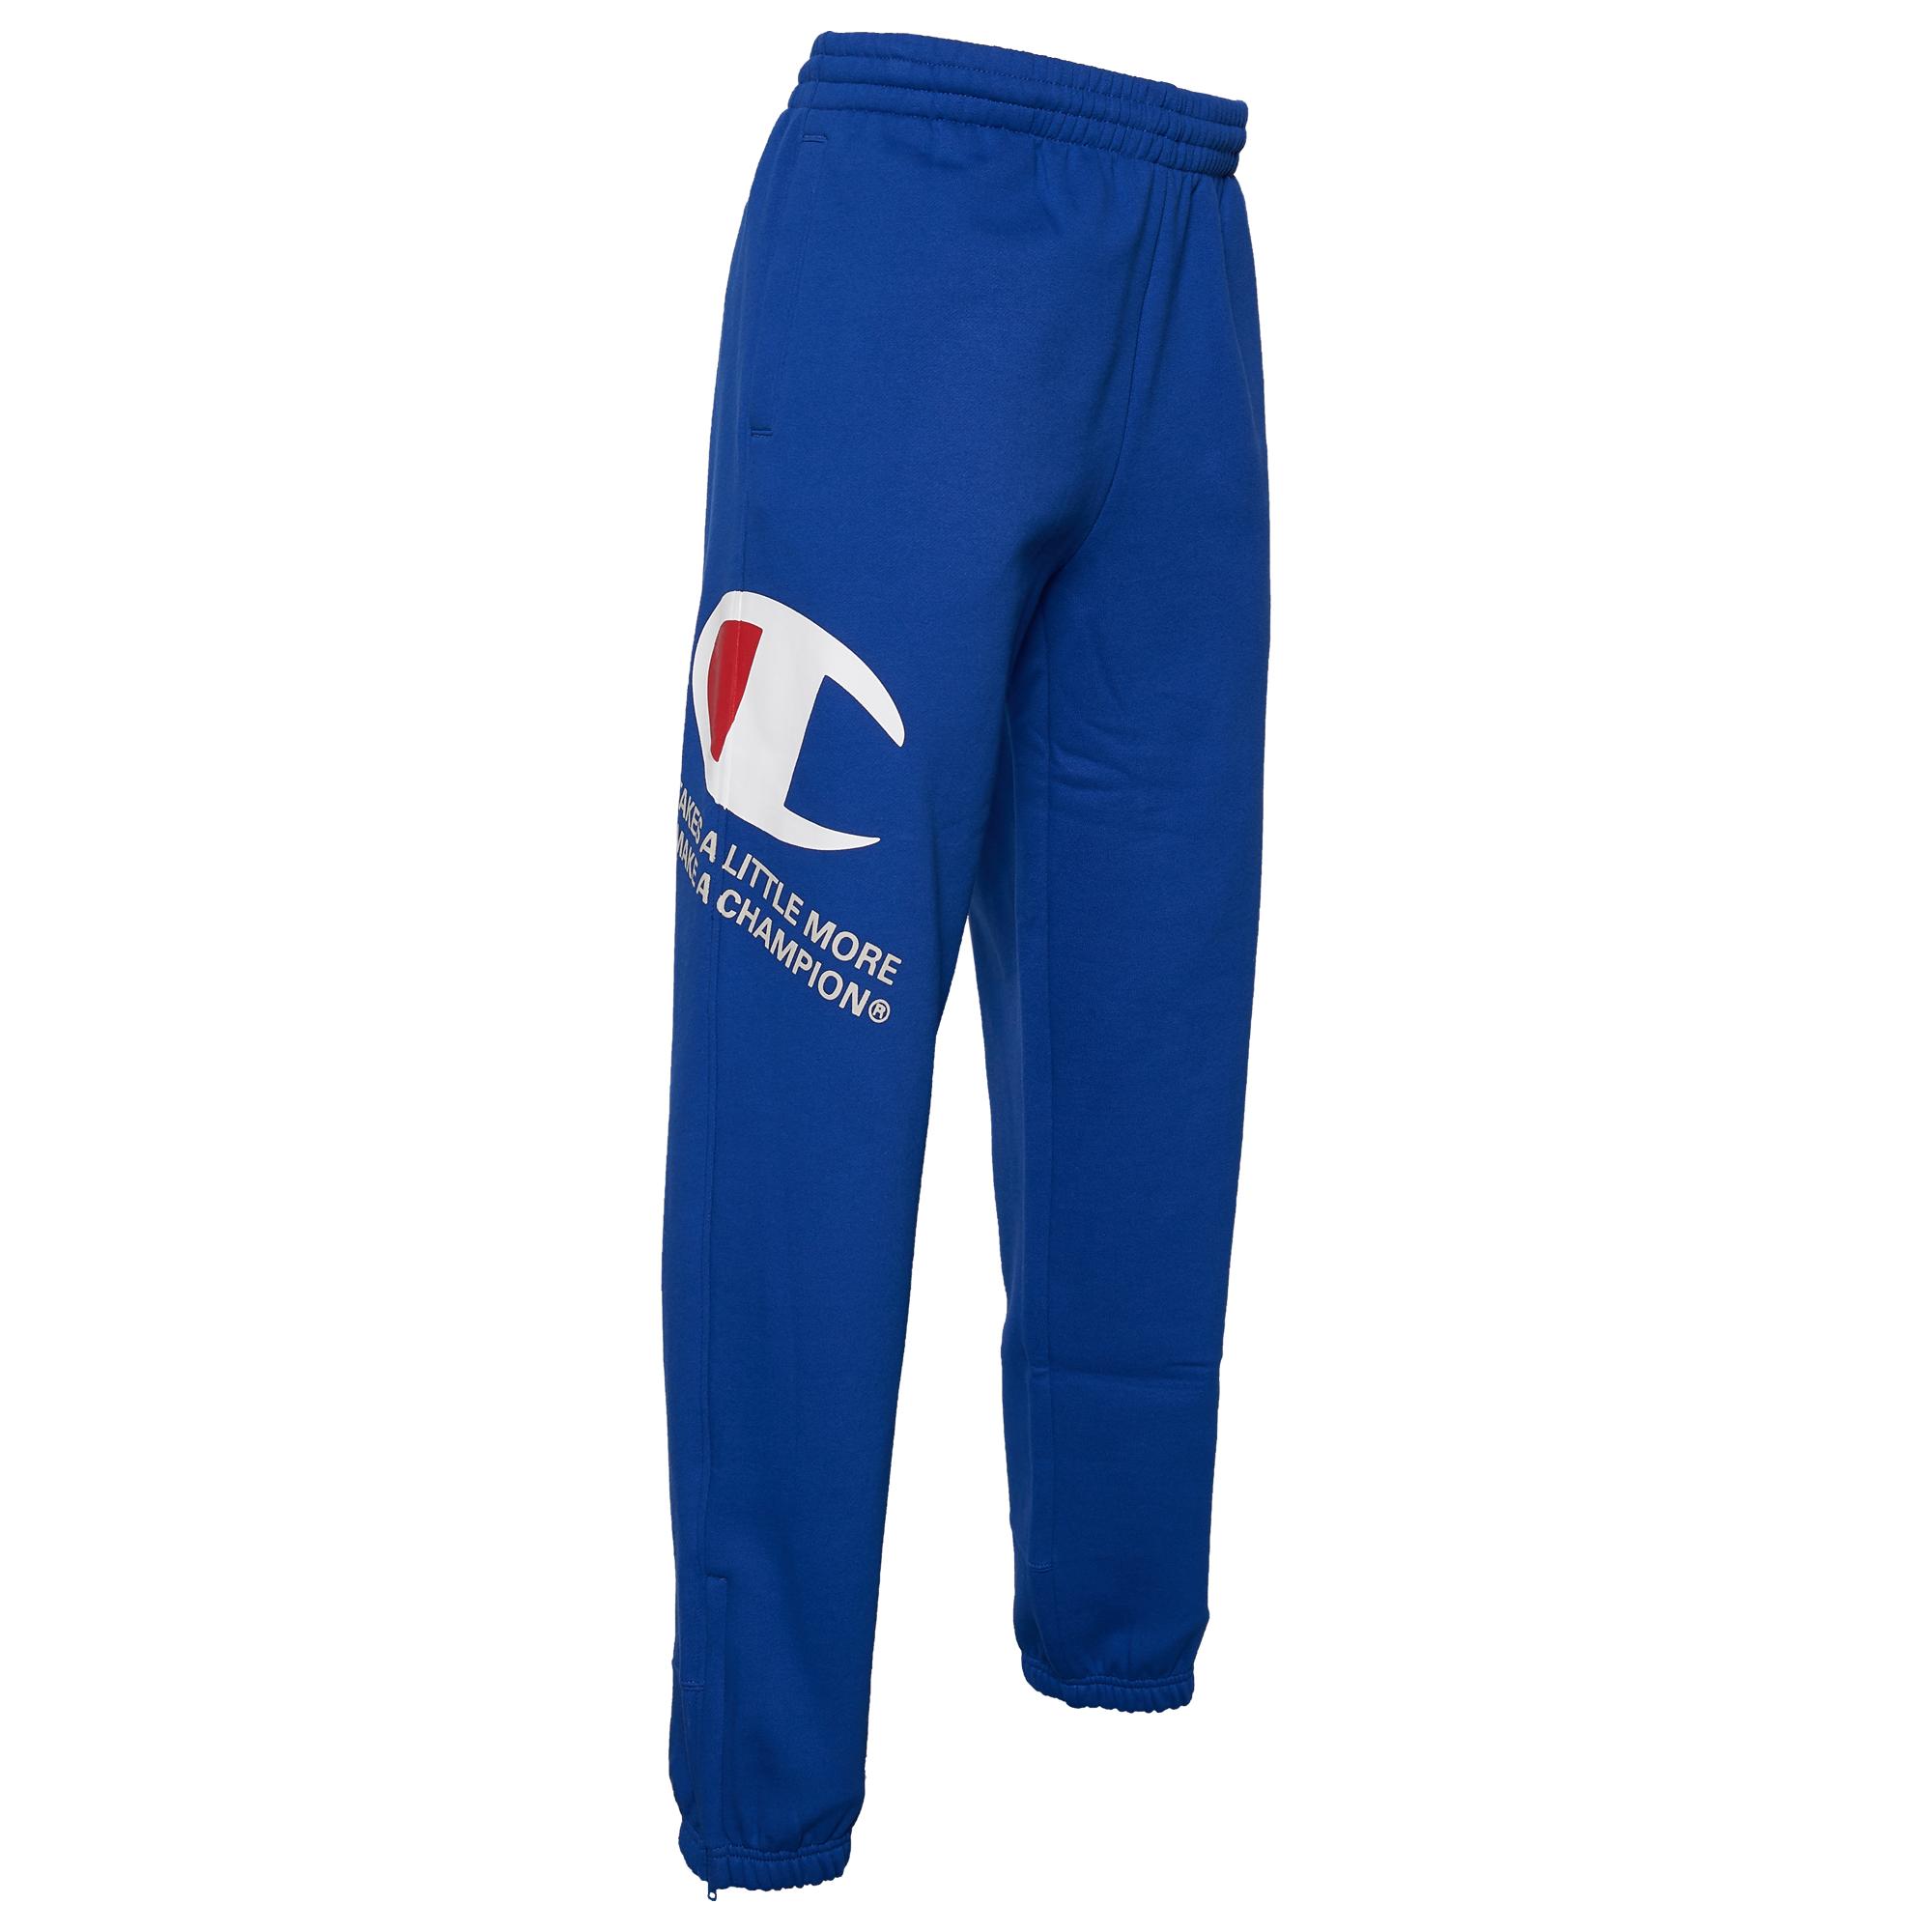 Champion Super Fleece Behind The Label 2.0 Pants in Blue for Men - Lyst